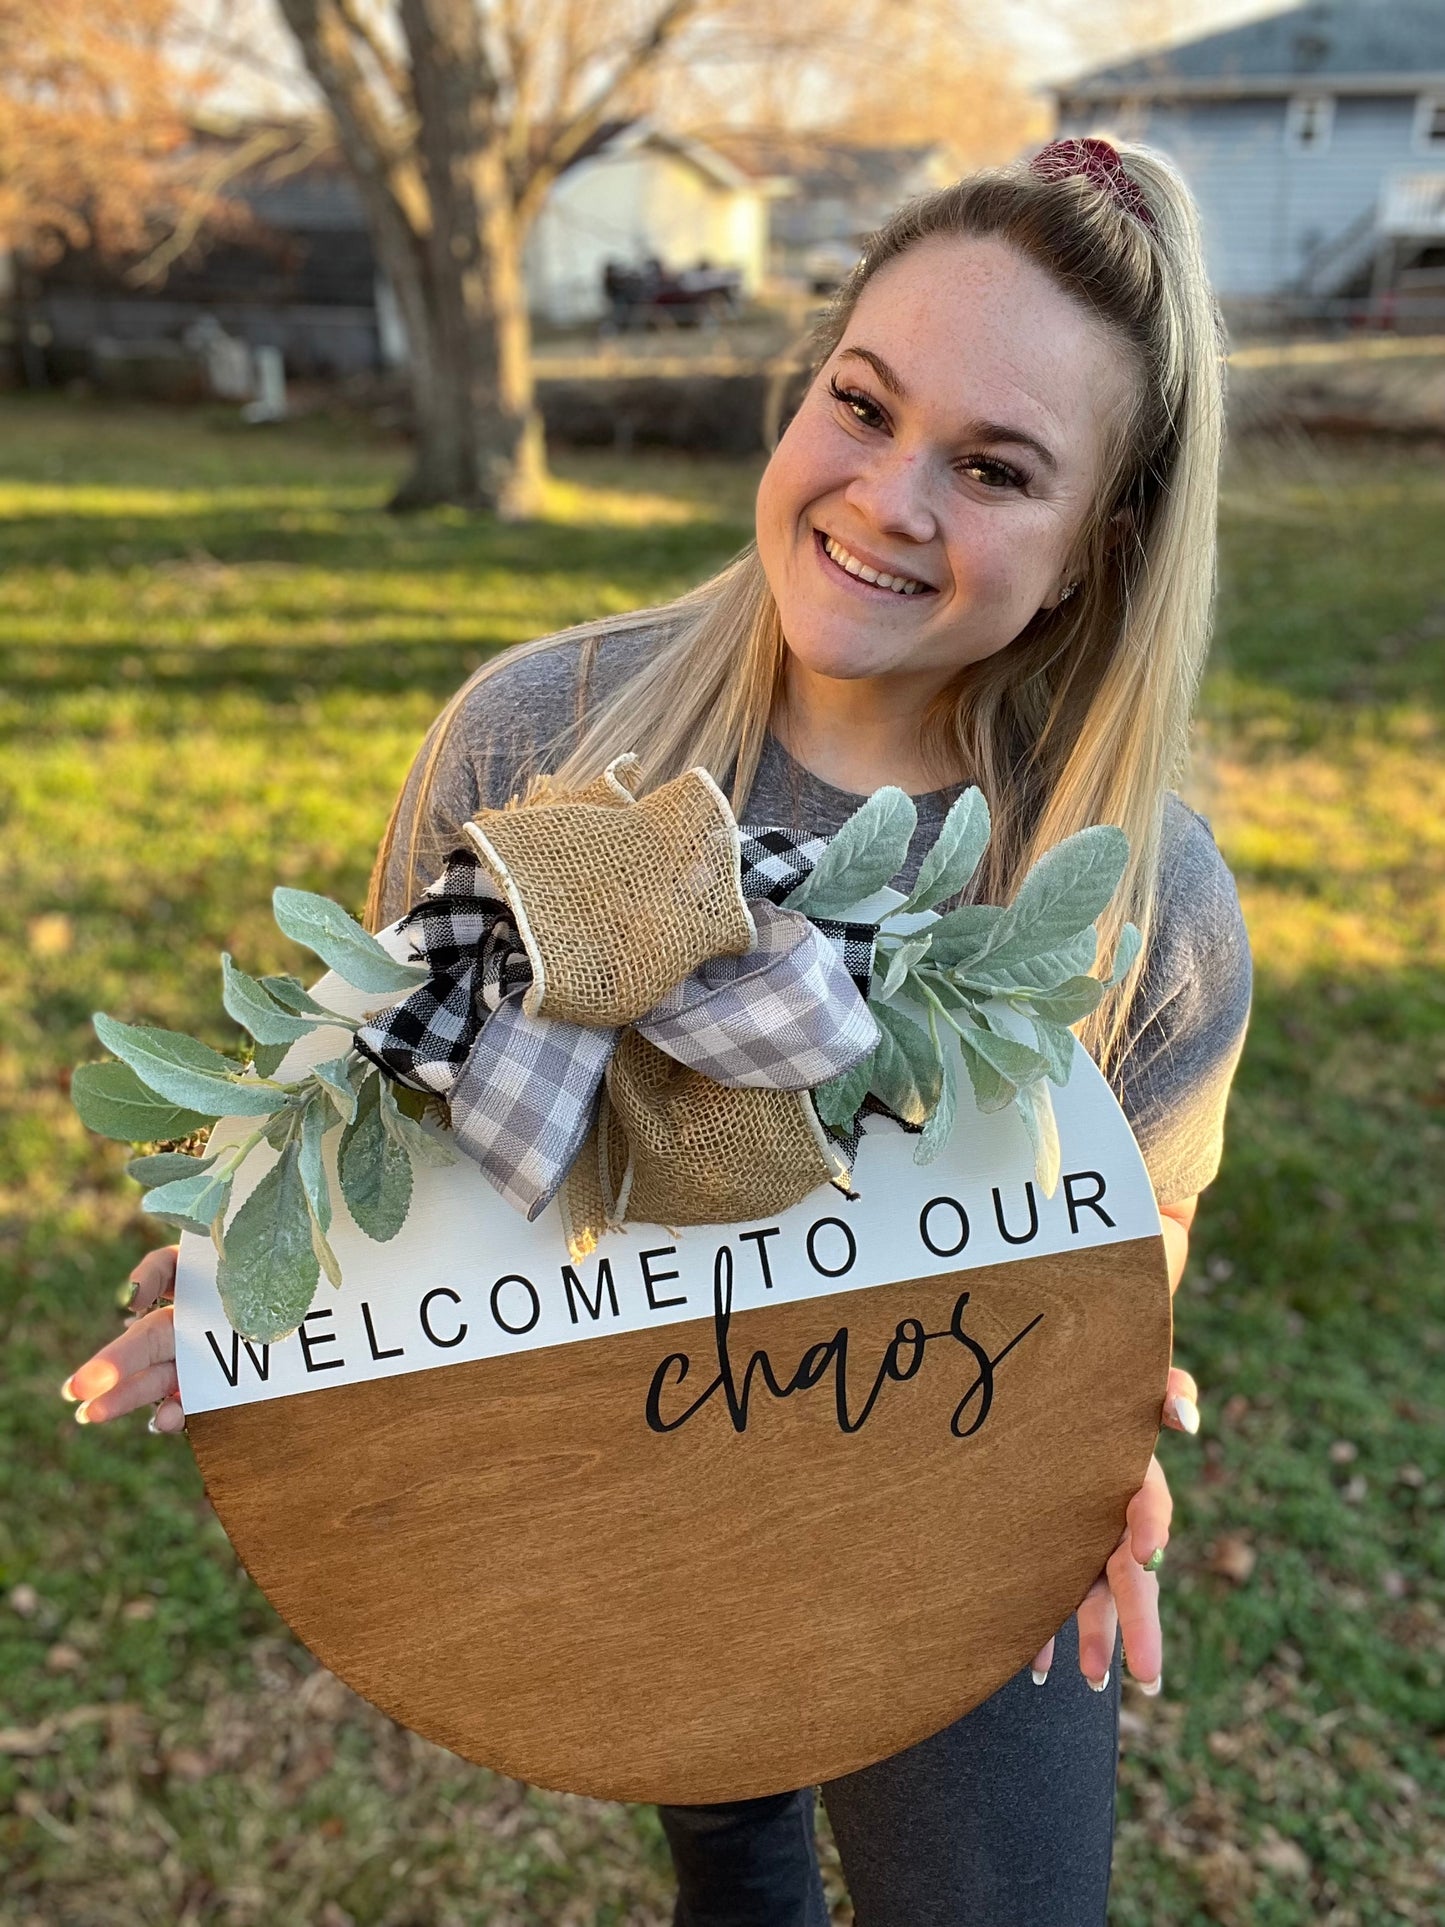 Welcome To Our Chaos - 18” Early American Door Hanger